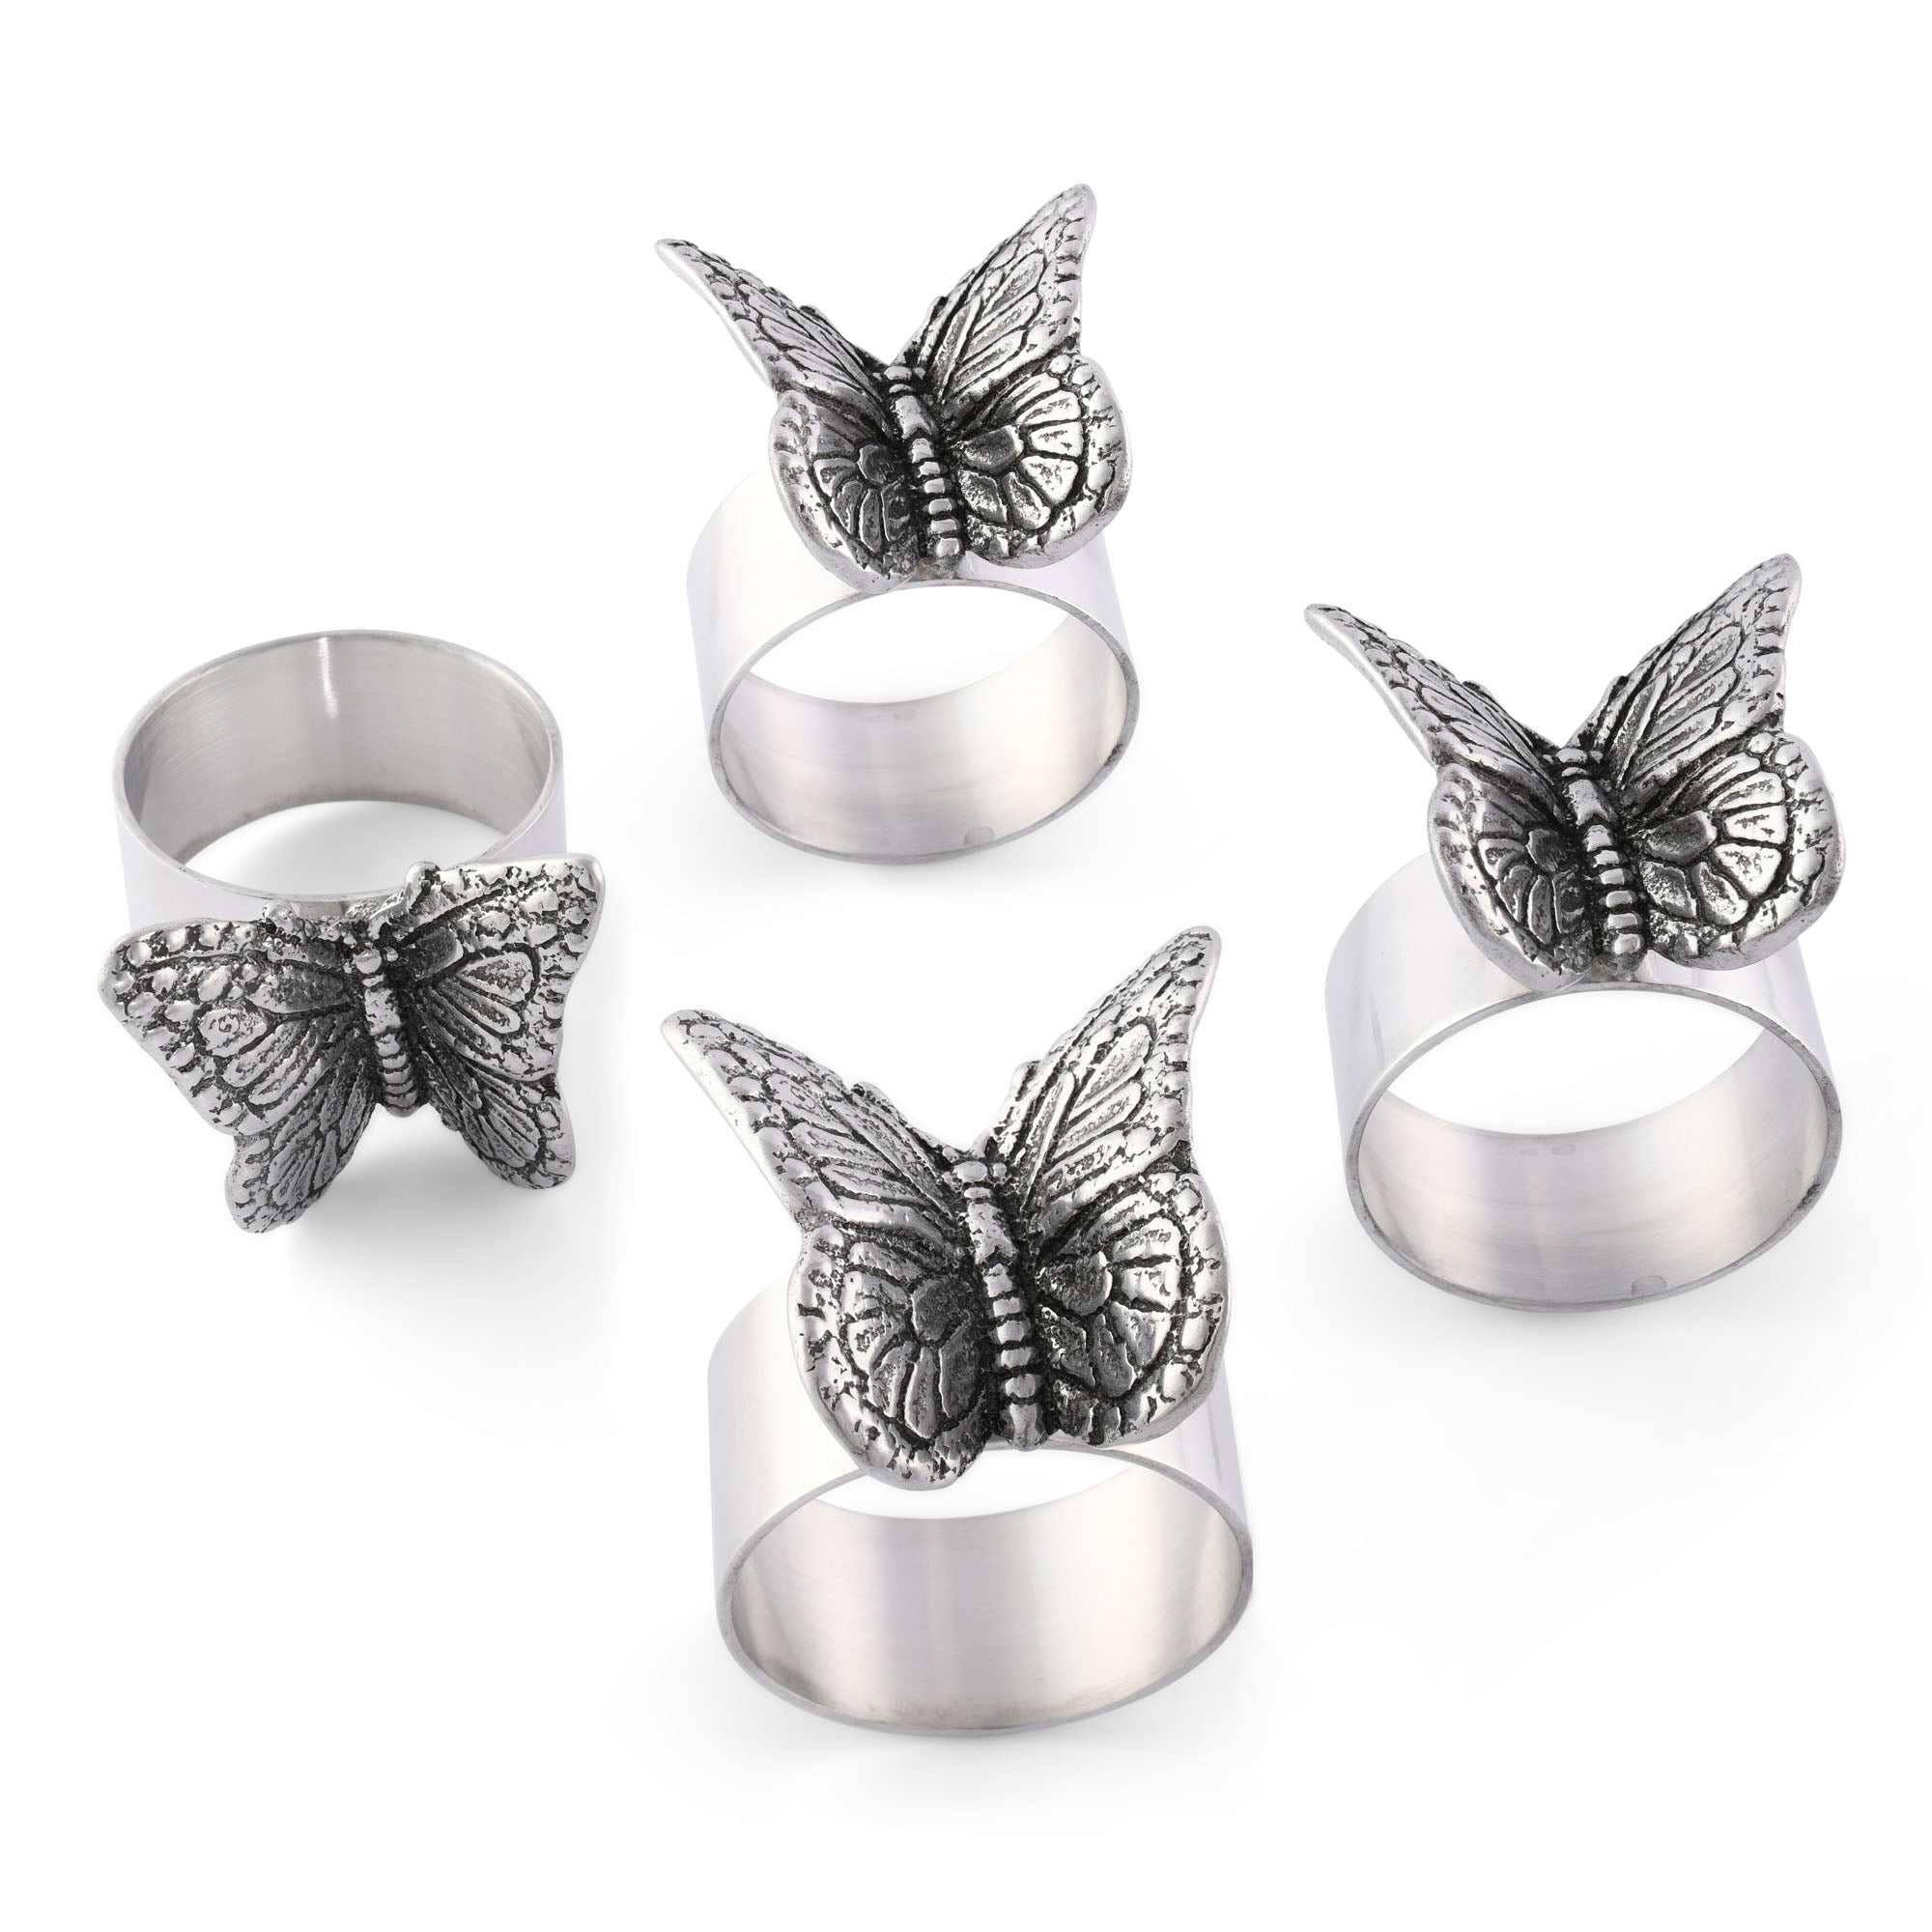 Arthur Court Butterfly Napkin Rings - set of 4 Product Image